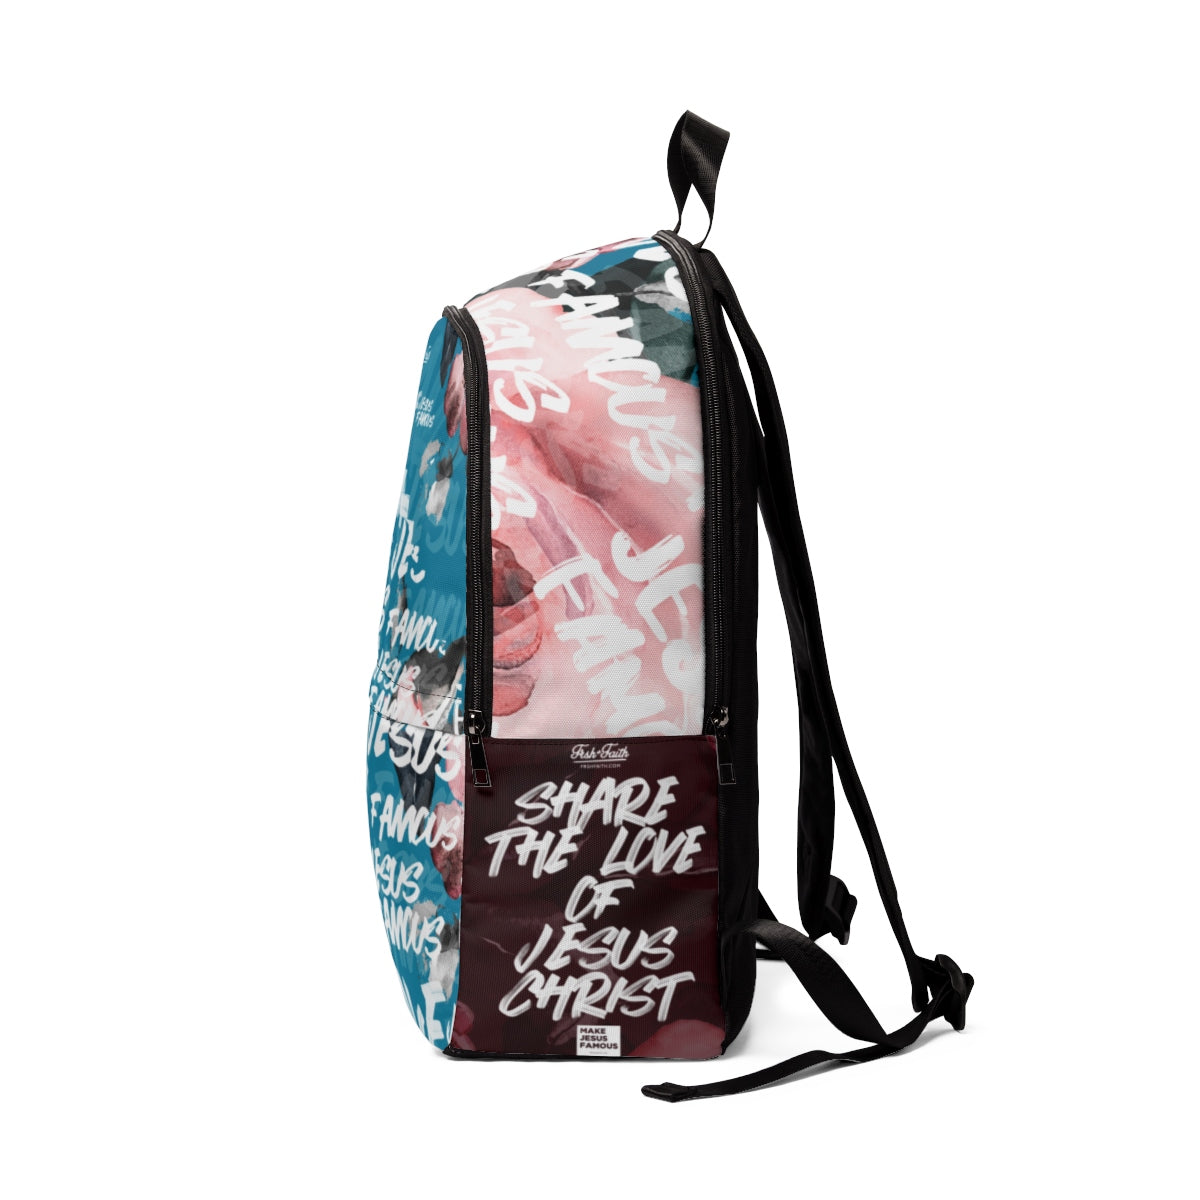 MJF Teal & Floral Fabric Backpack